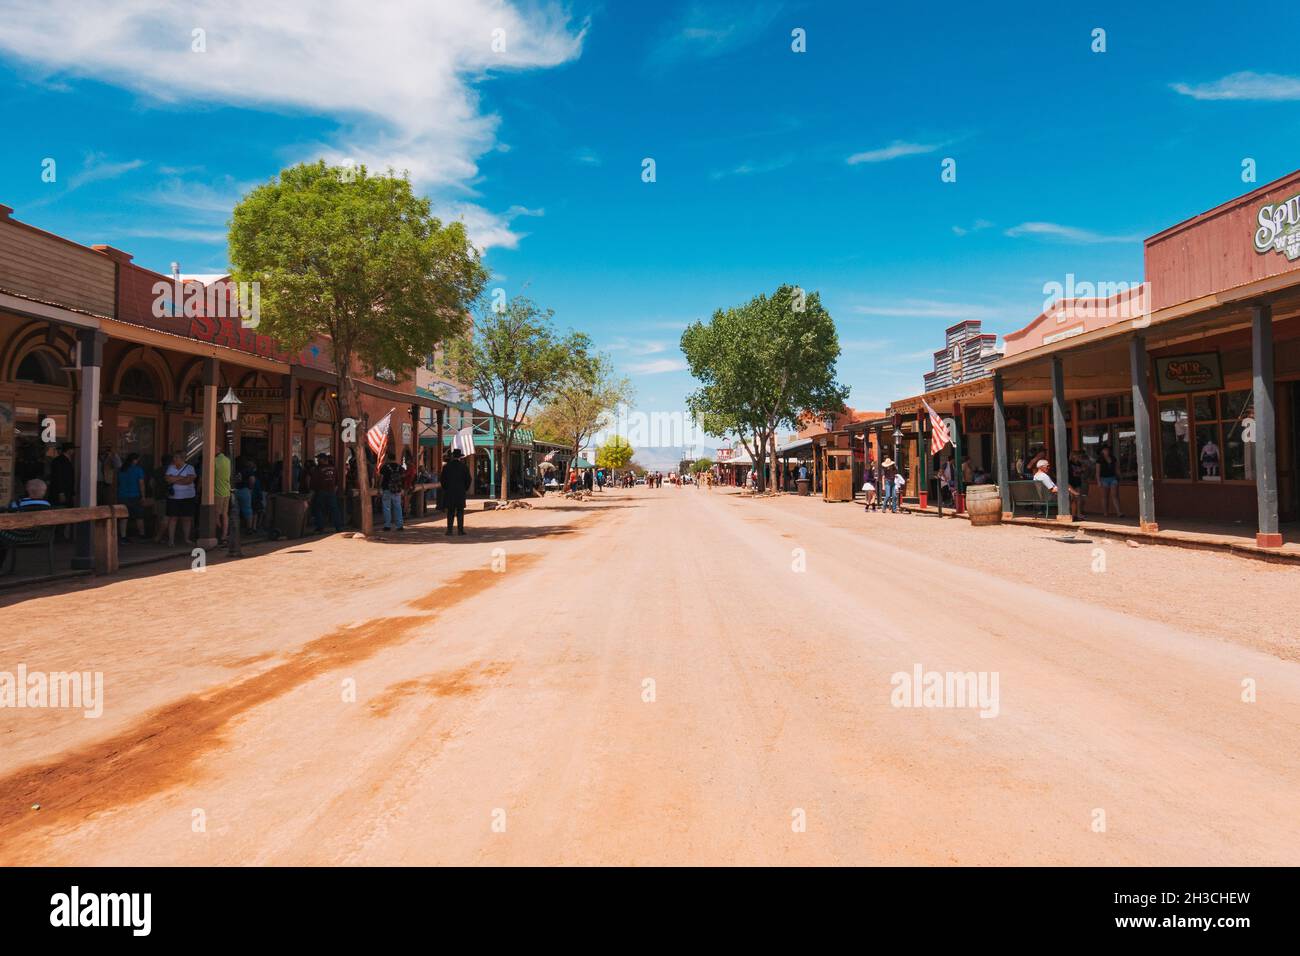 The historic town of Tombstone, AZ, during the annual Rose Festival, featuring many local residents and businesses dressed in Old West attire Stock Photo